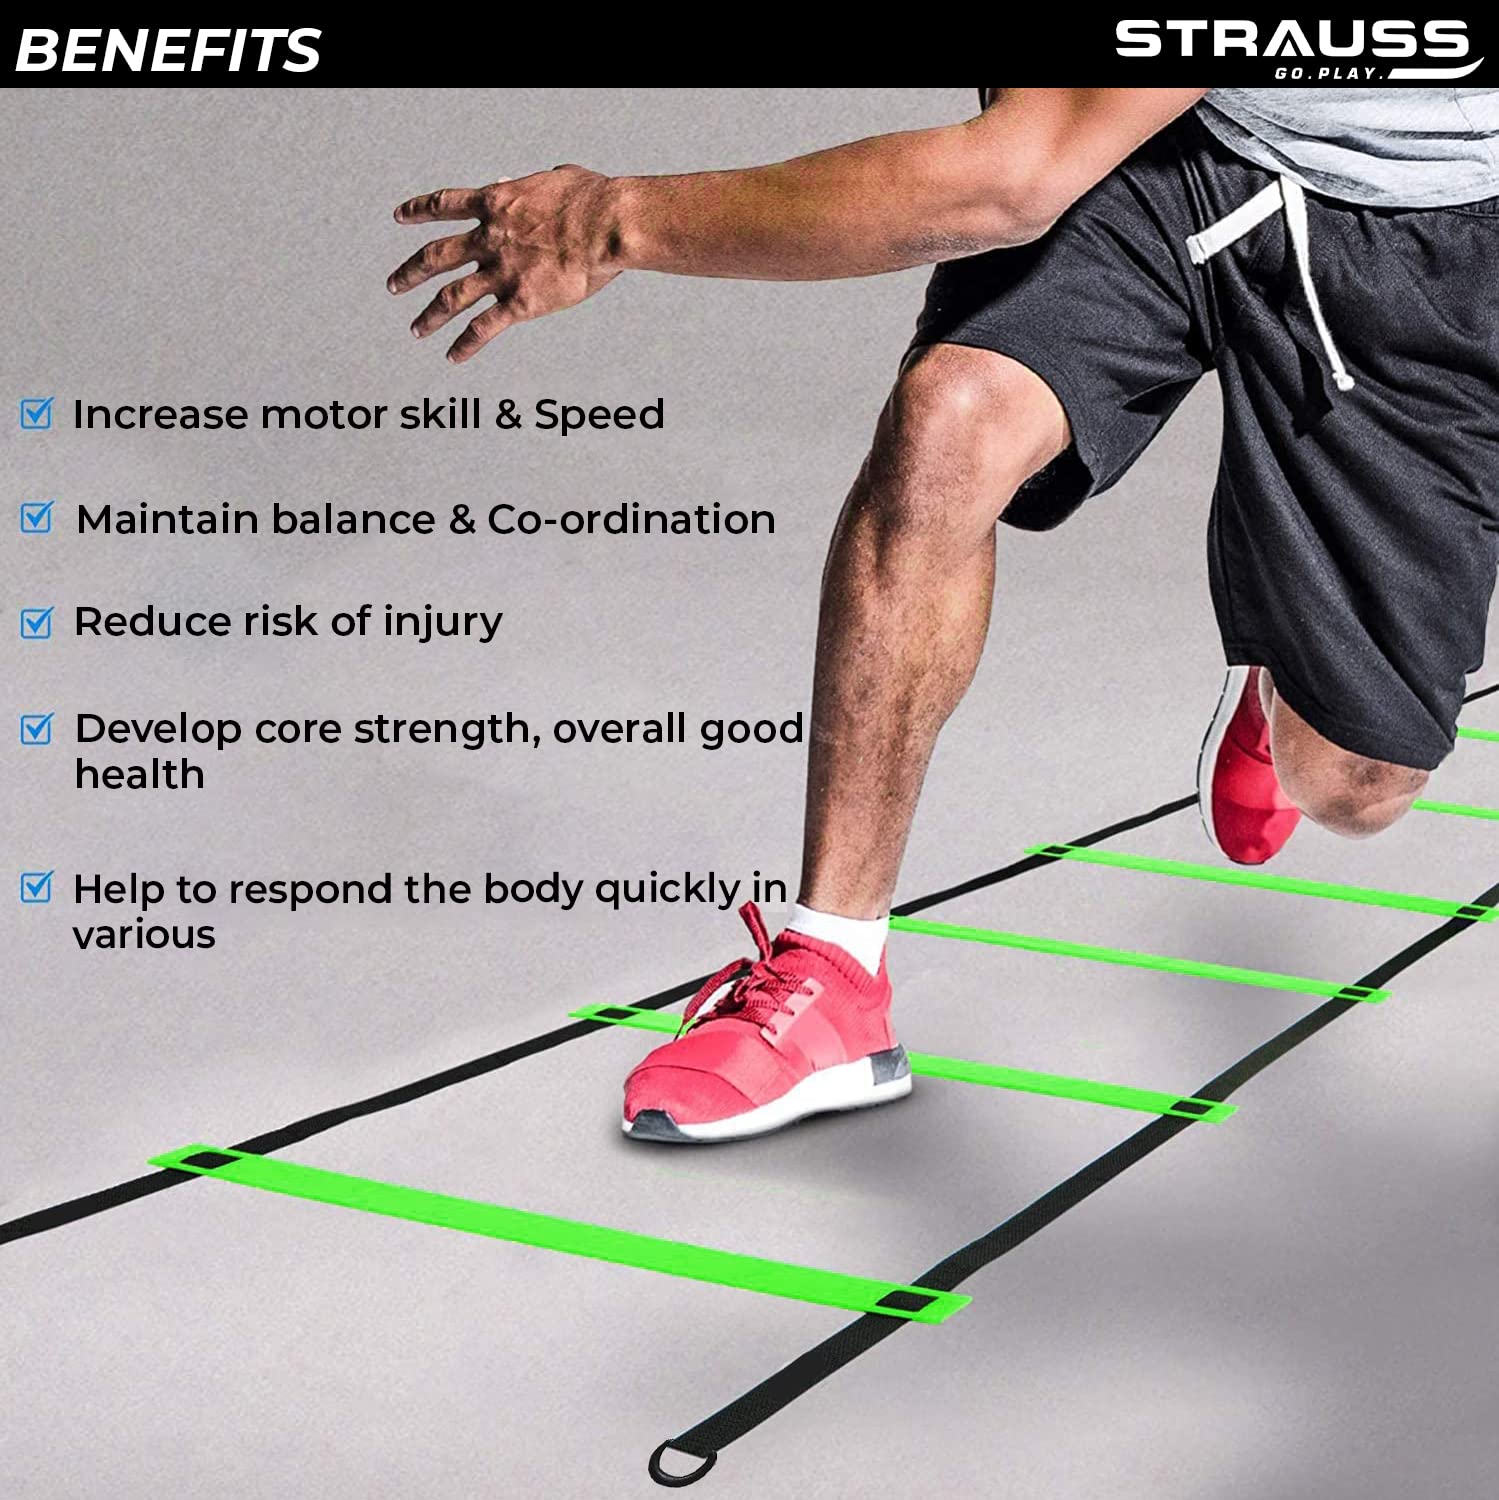 Strauss Adjustable Exercise Agility Ladder, 8m, (Green)